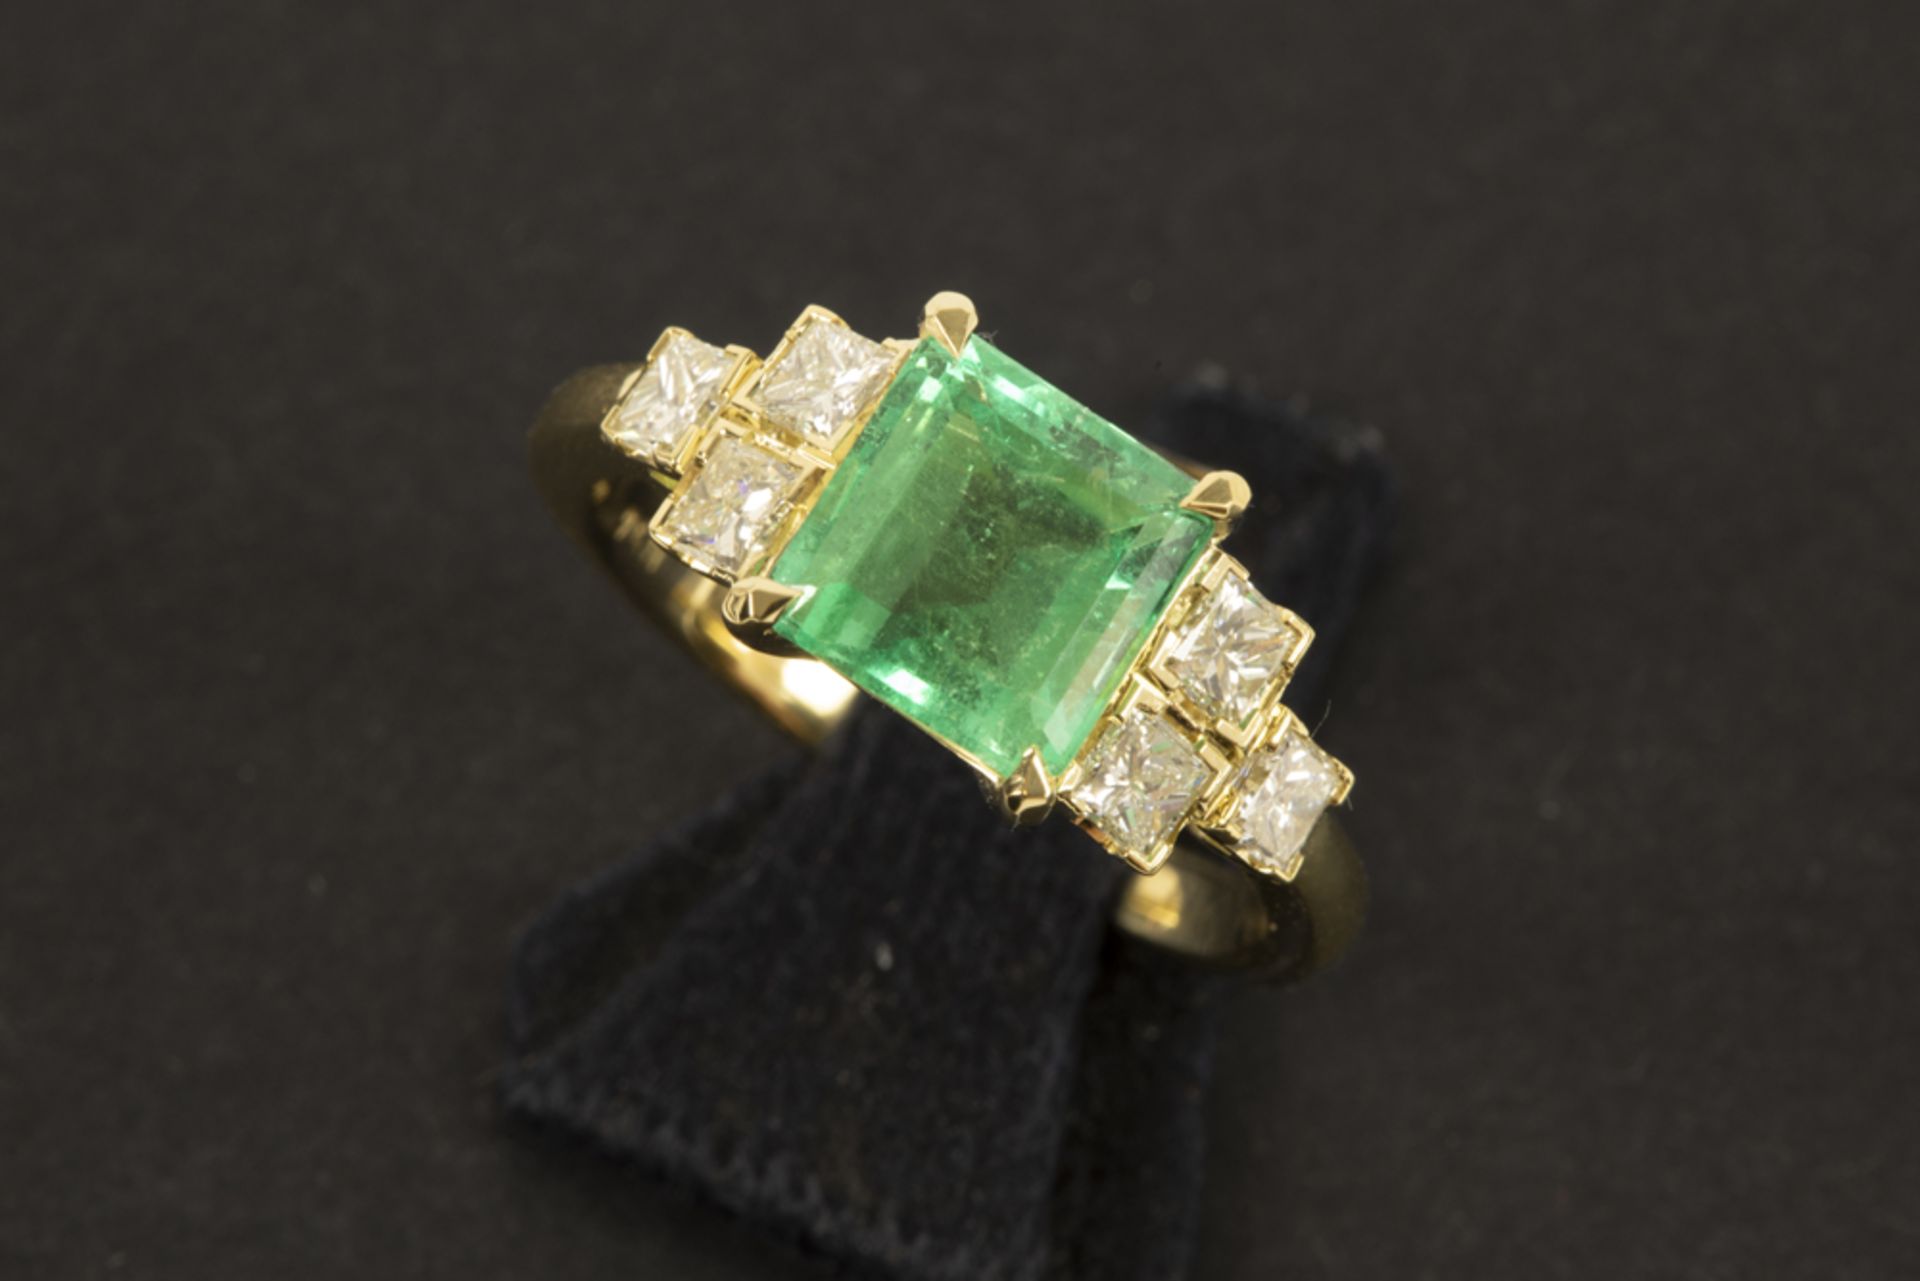 classy ring in yellow gold (18 carat) with a 2,01 carat Colombian emerald and 0,65 carat of very